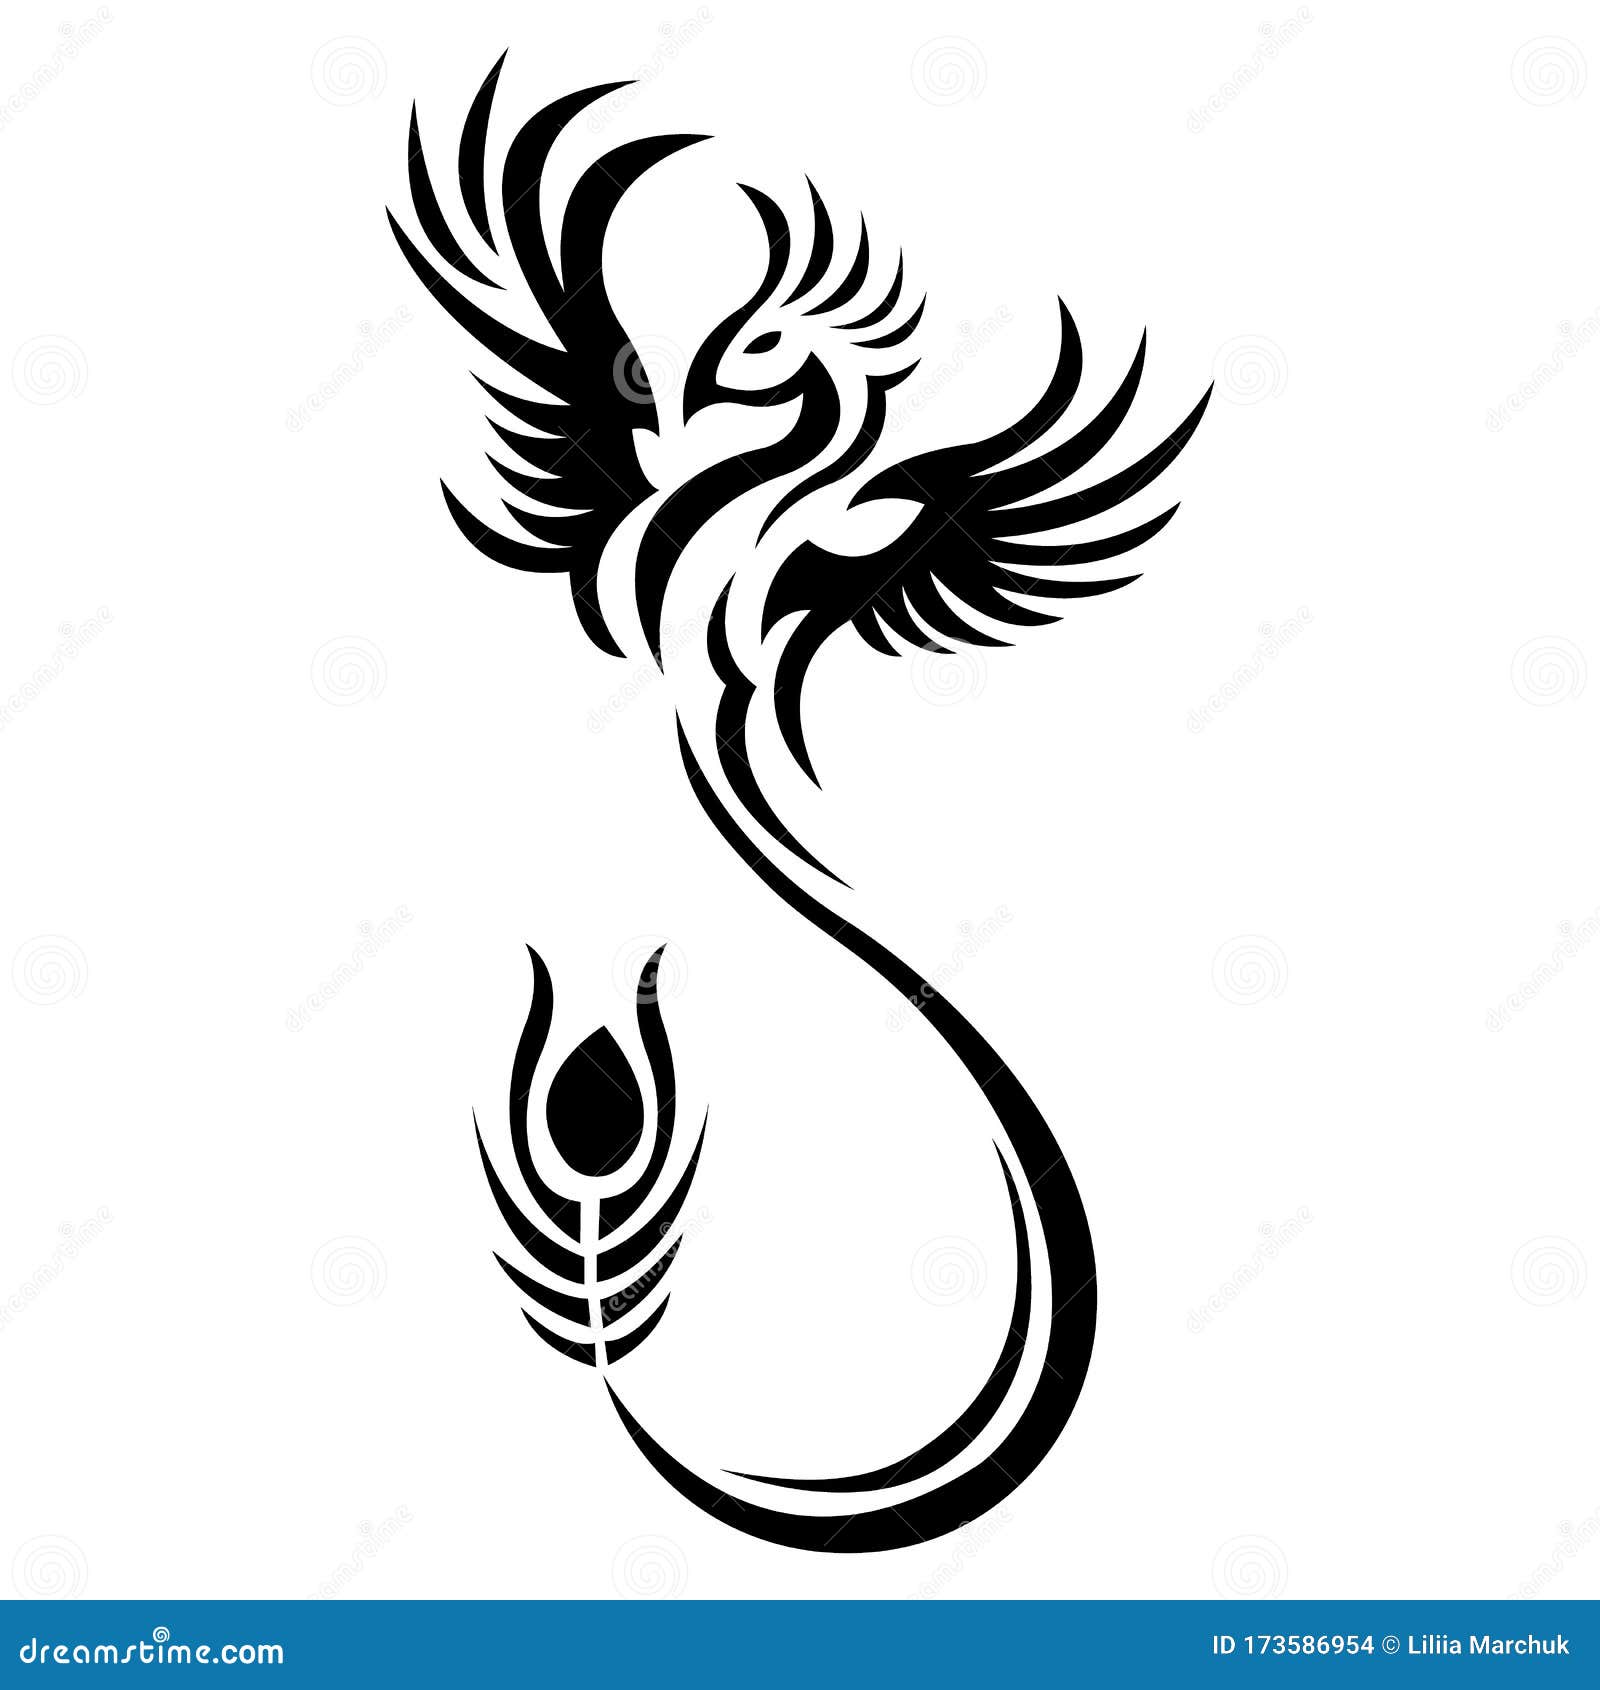 Phoenix Bird Black Silhouette Drawn by Ornate Lines in a Flat Style. Bird Tattoo, Firebird Logo, Emblem for Fashion Design Stock Vector - Illustration of design, isolated: 173586954